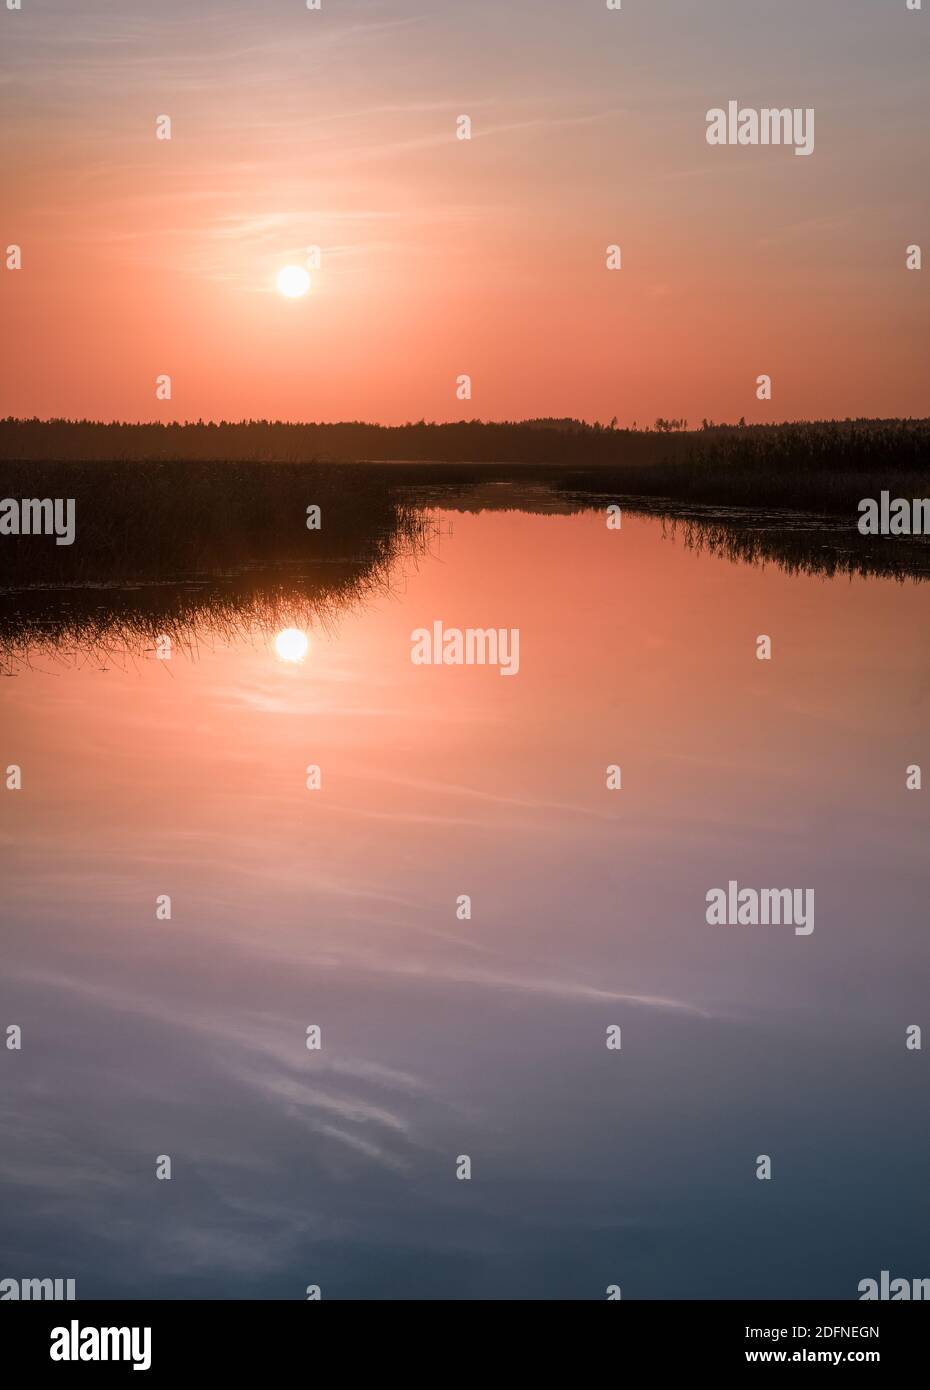 Scenic sunset landscape with water reflections and mood colors at autumn evening in Finland. Stock Photo